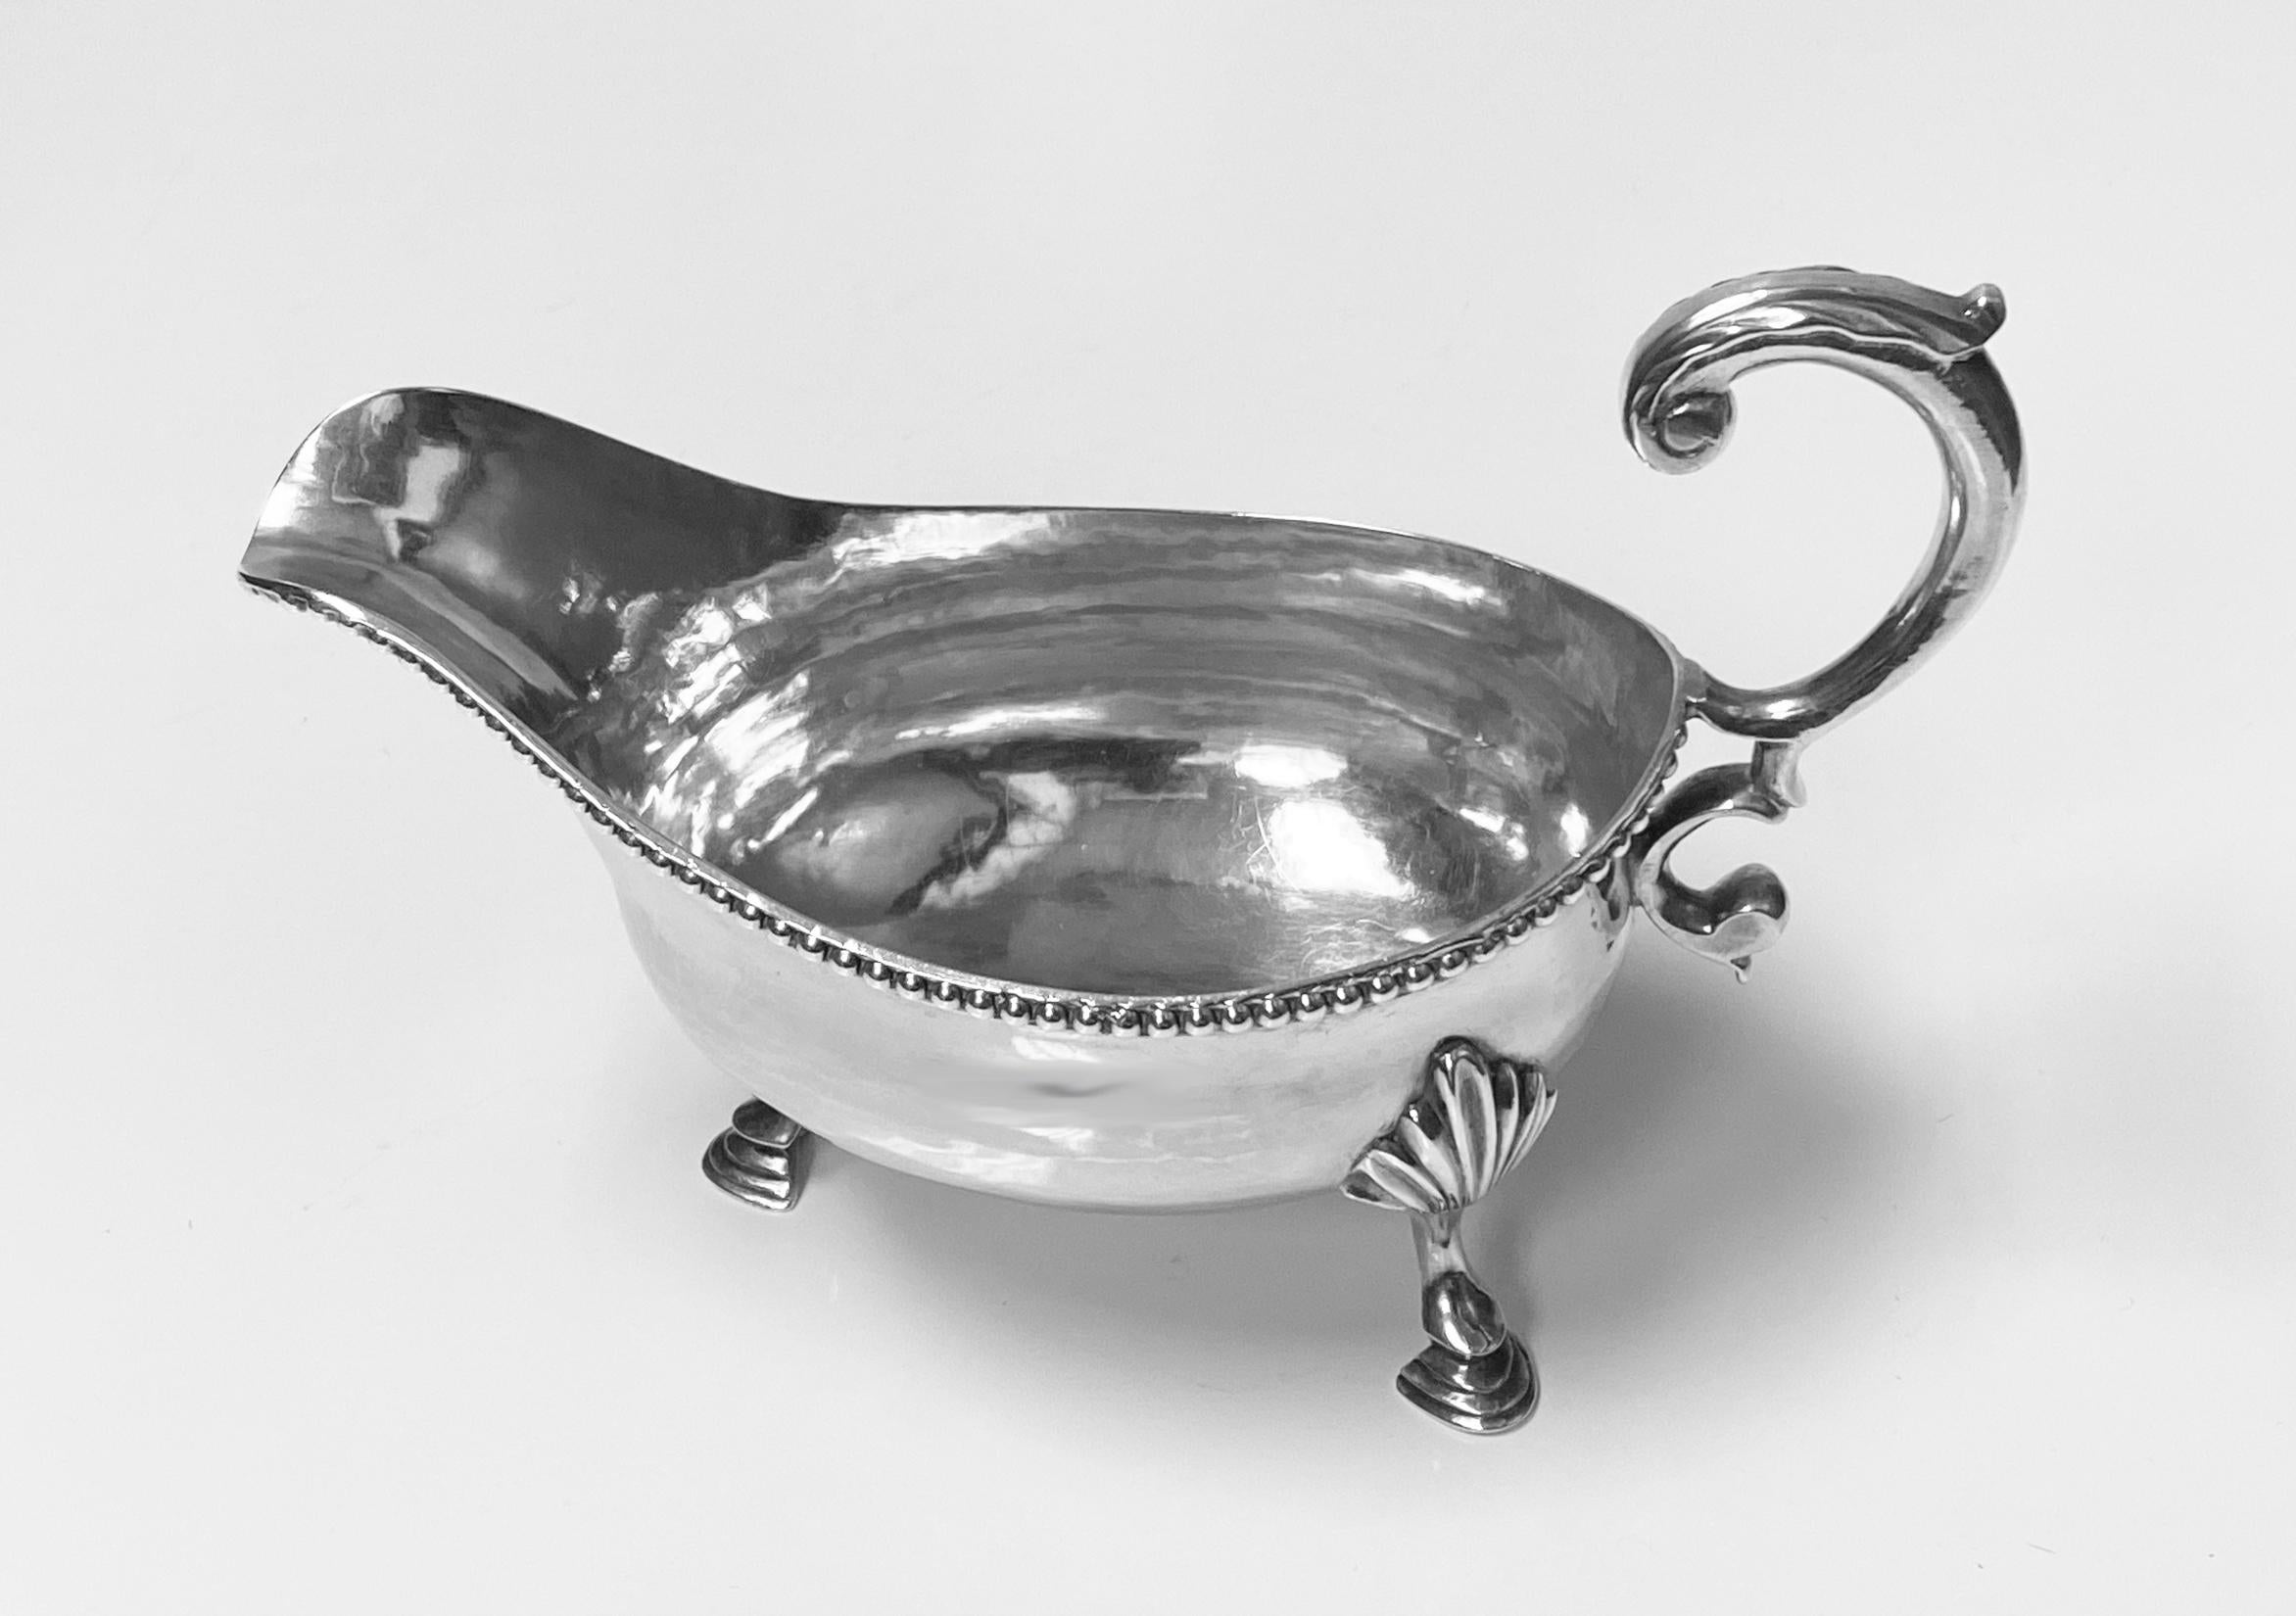 Antique 18th century Georgian silver sauceboat, London 1785 by Charles Hougham. The plain bodied sauceboat on three shell knuckle legs, upper bead border, foliate capped double scroll handle. Fully hallmarked on underside. Measures: Length 6 ¼